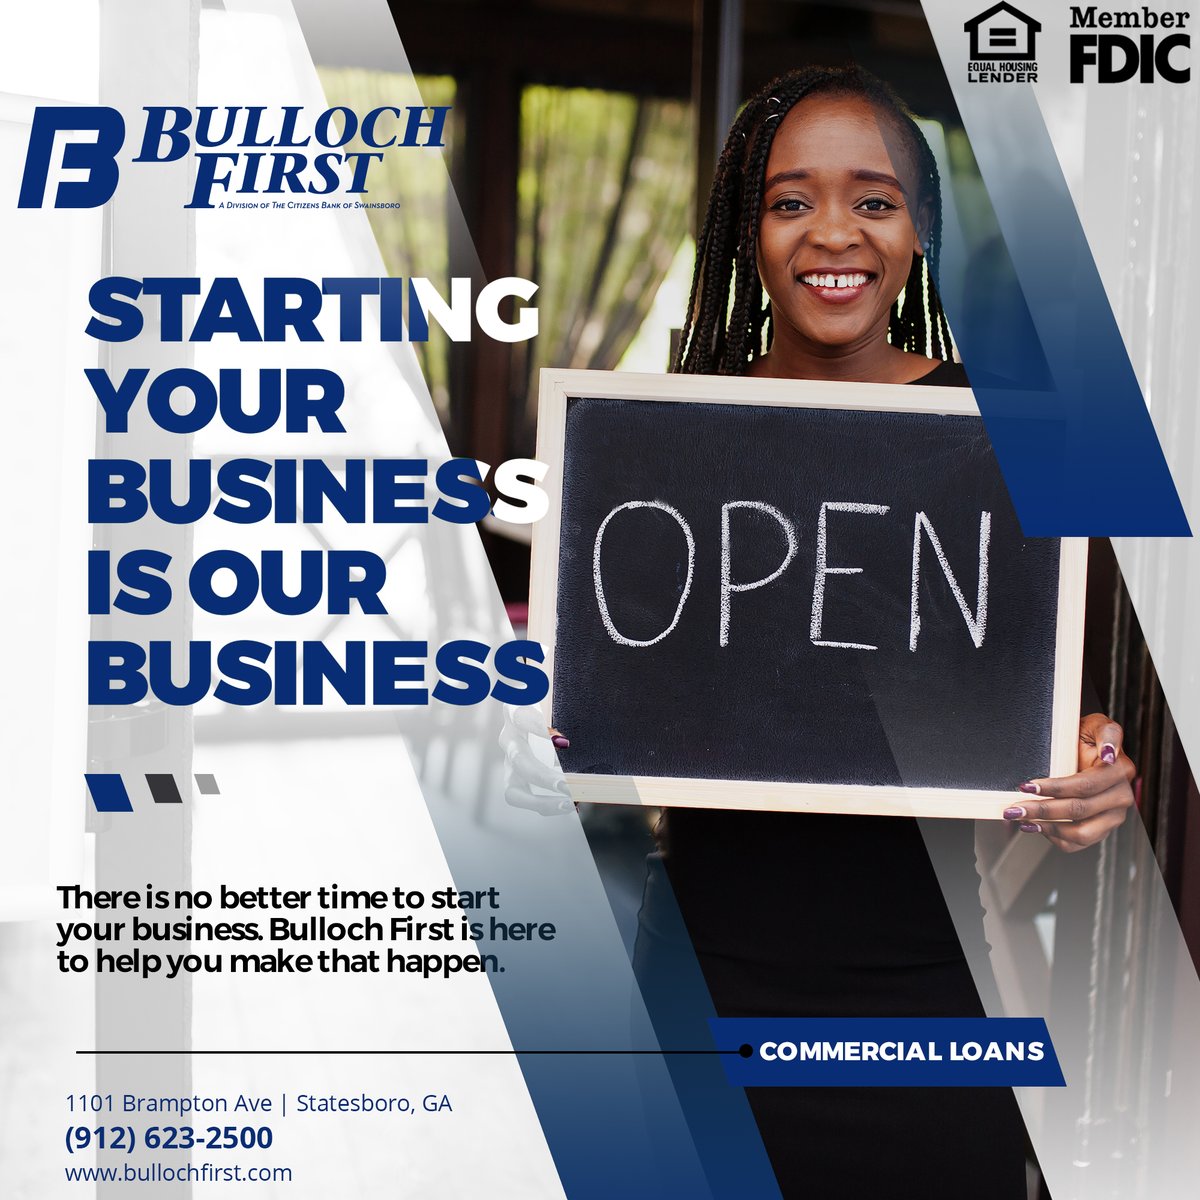 Are you ready to take the next step in your small business adventure? 💵🏃 

Let us help get you started with a small business loan today, because “small business is our business!”

#SmallBusinessLoan #BullochFirst